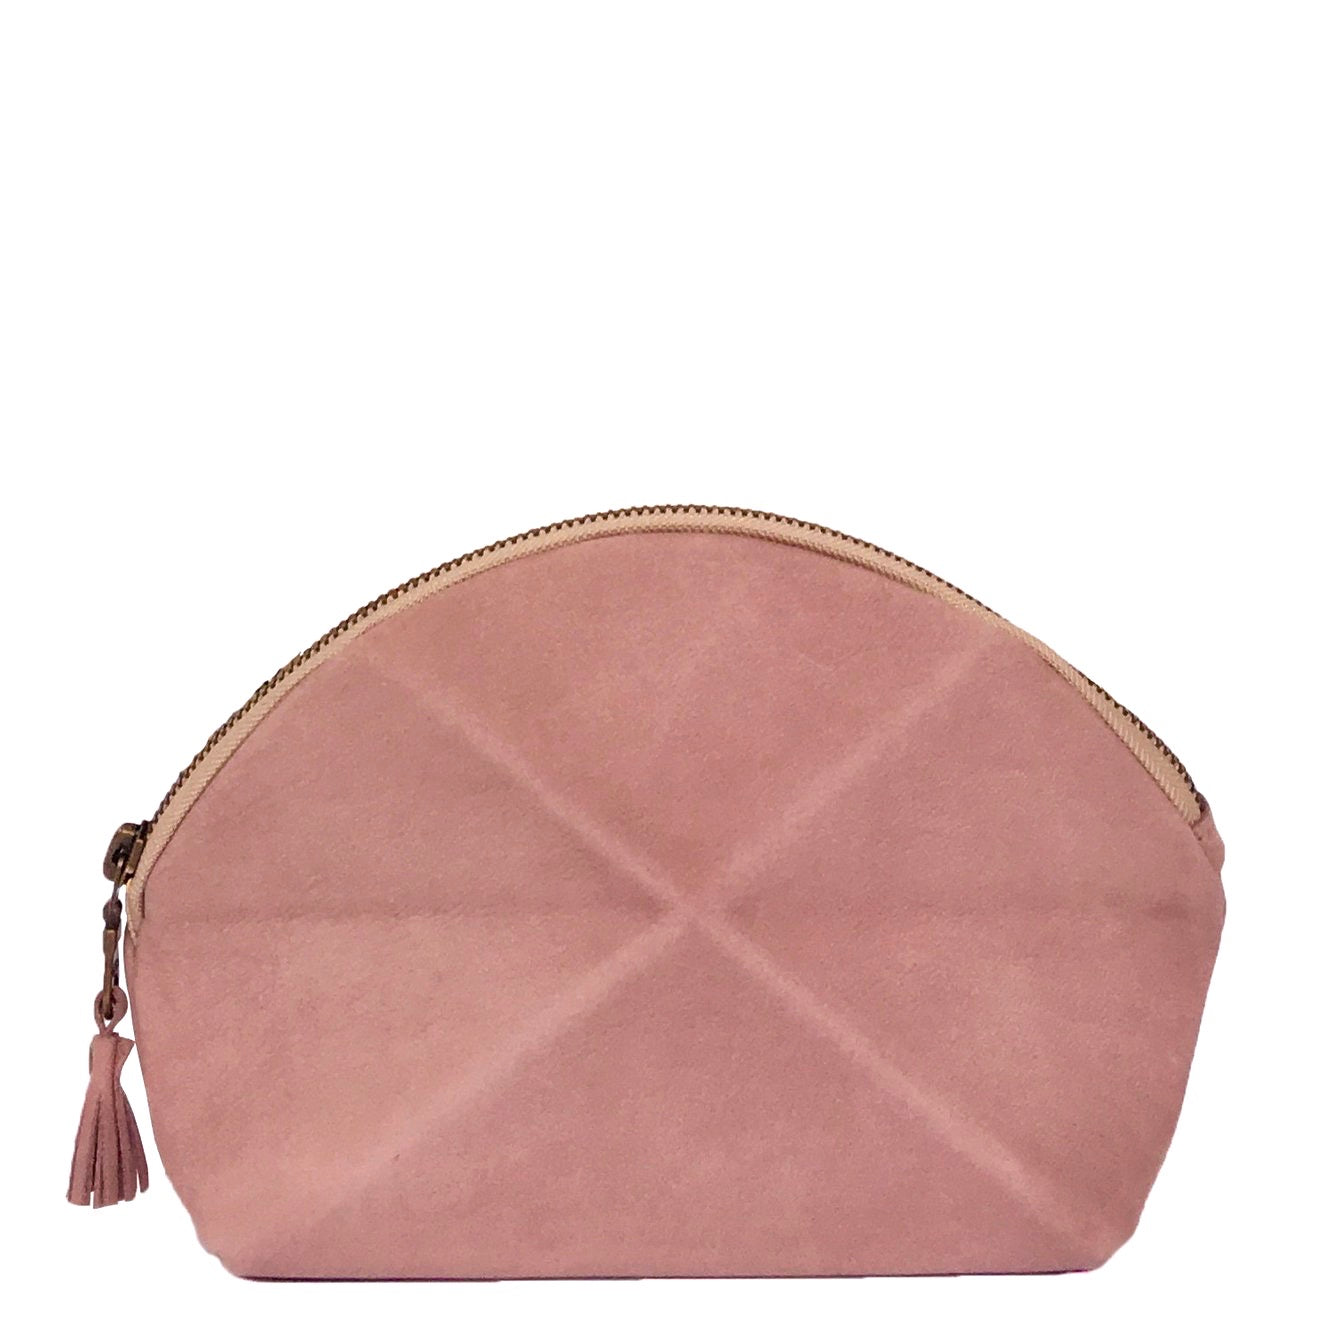 Pyramid Cross Body bag - pink suede leather